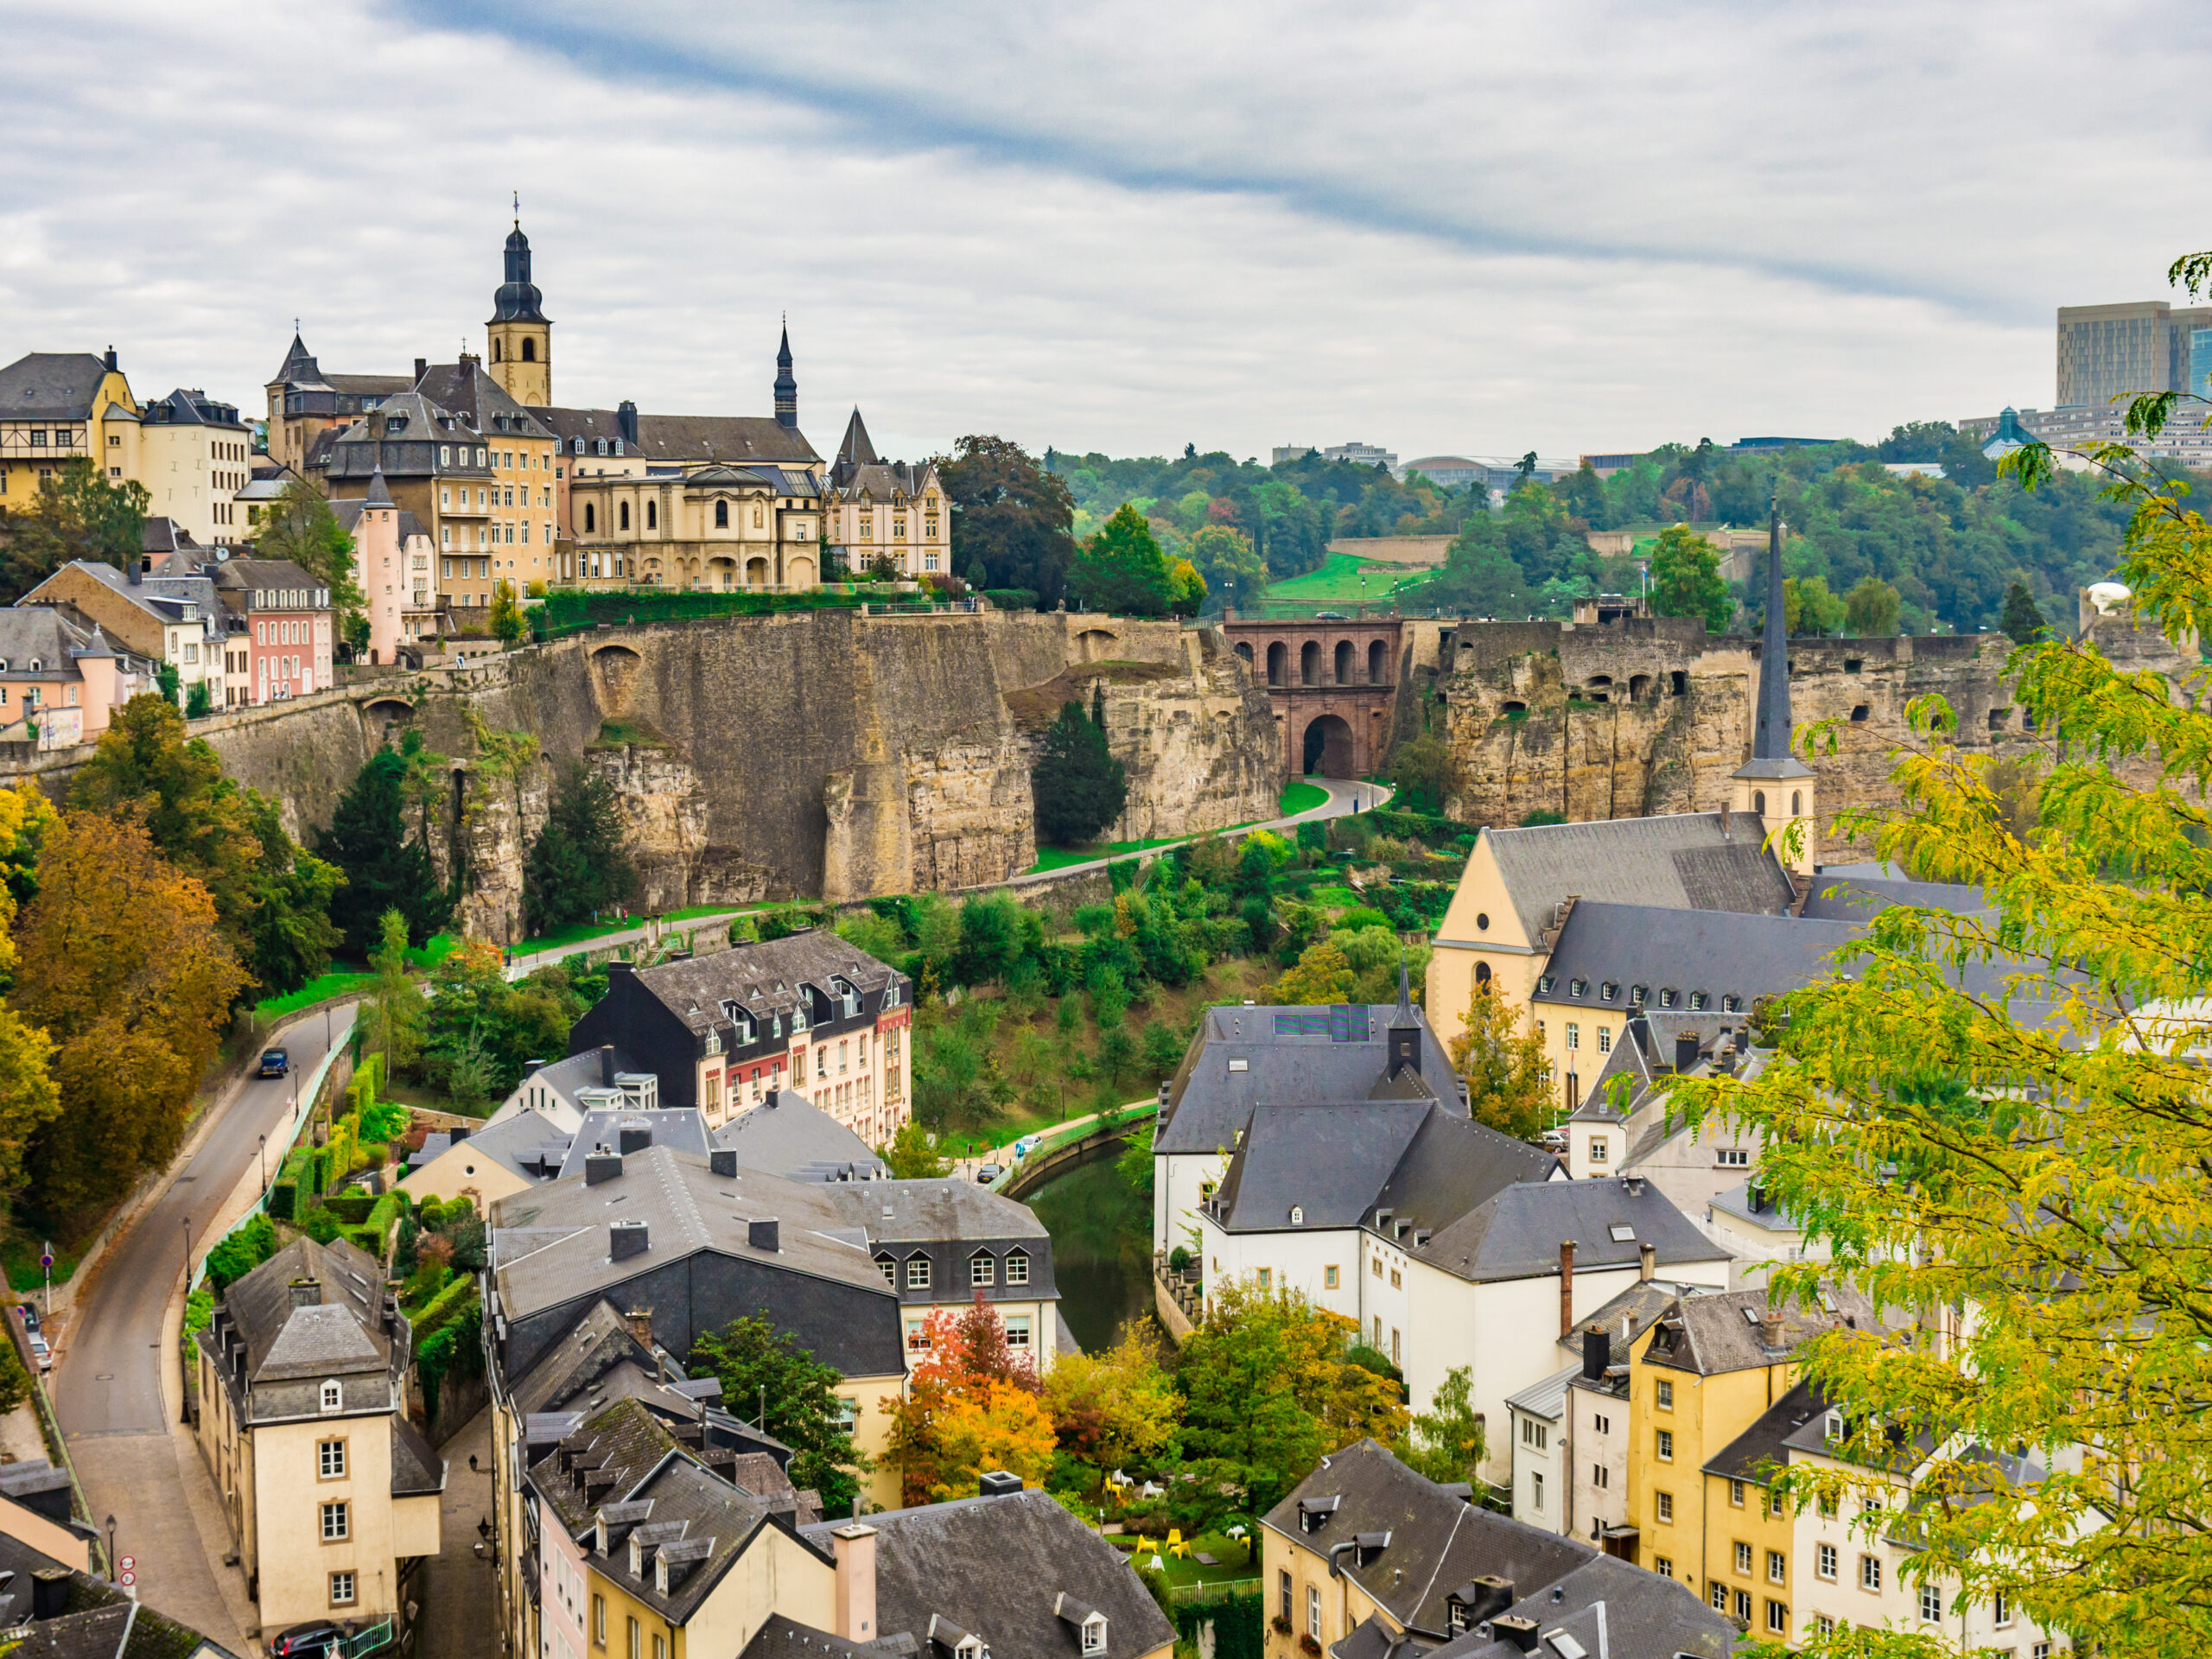 Luxembourg City of Luxembourg, where Morrison